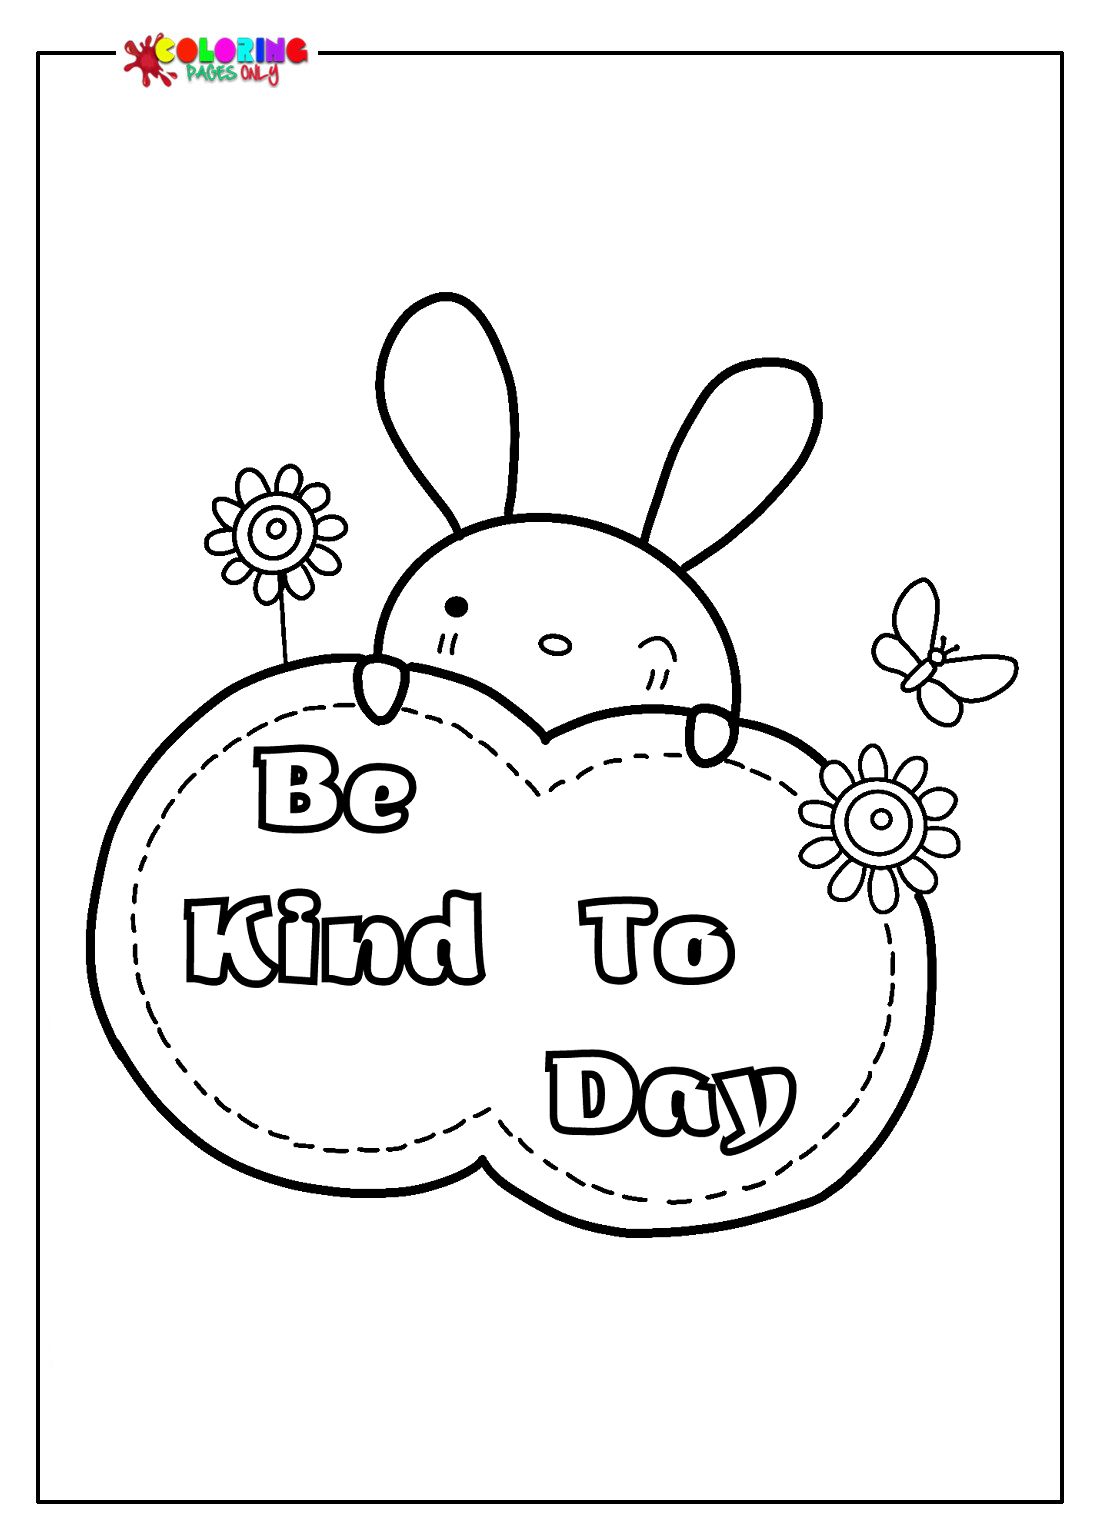 Be Kind To Day Coloring Page